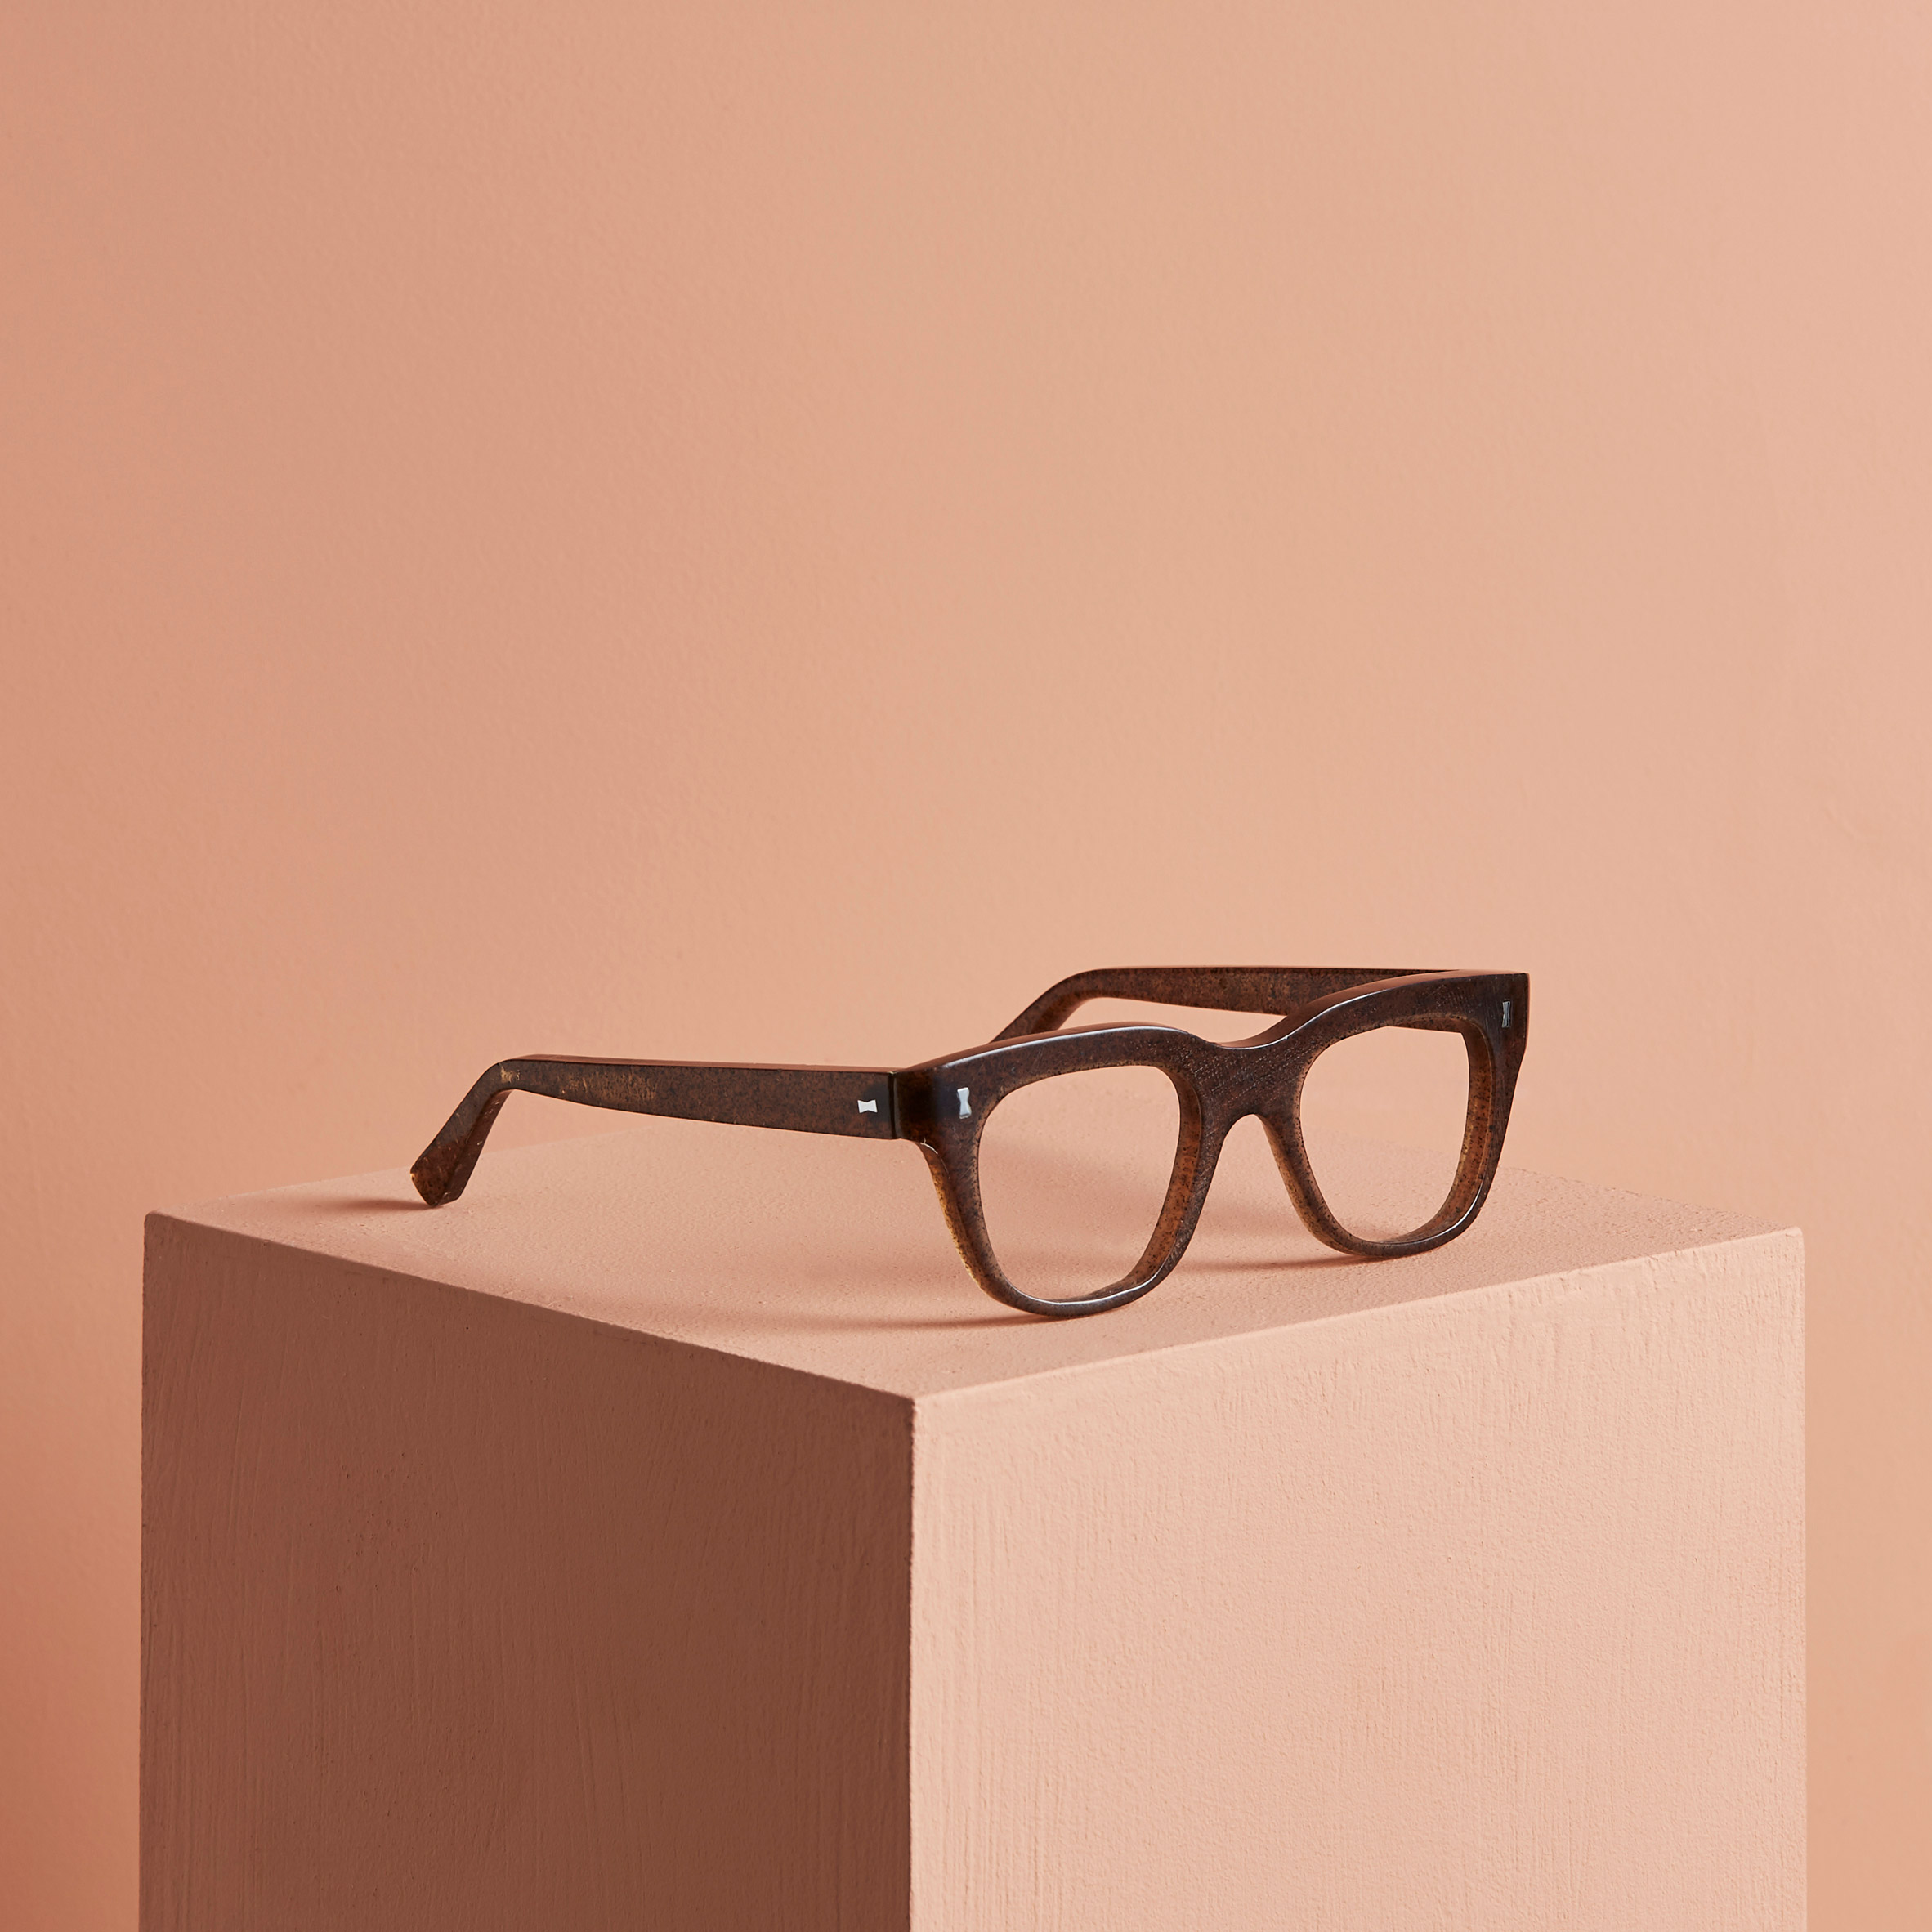 Eye Glasses With Original Case Material Culture 